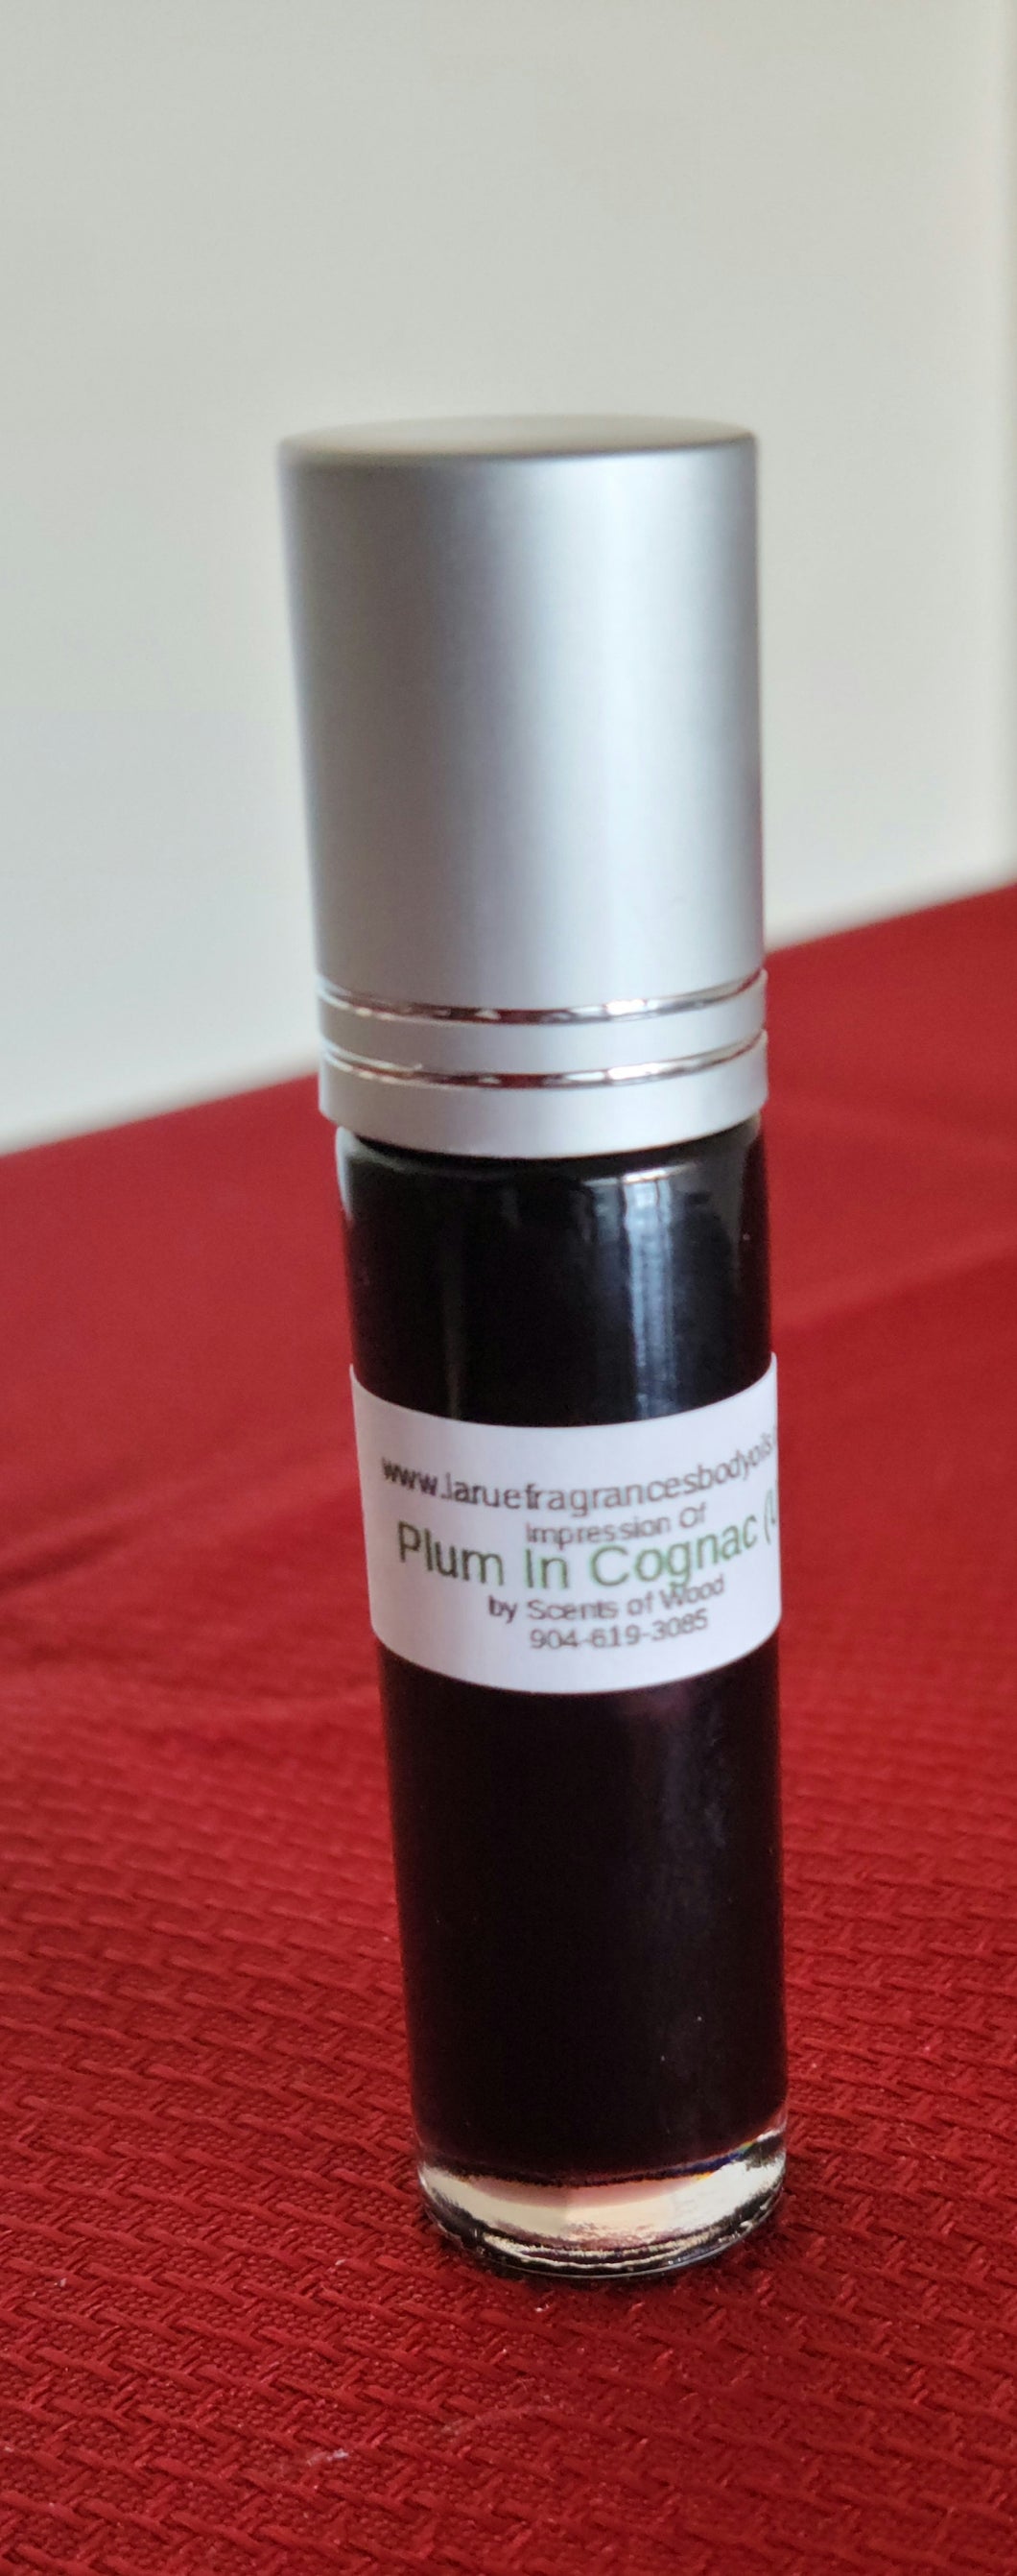 Our Impression Of Plum In Cognac by Scents Of Wood men women unisex fragrance 1/3oz roll on cologne perfume fragrance body oil. Alcohol Free